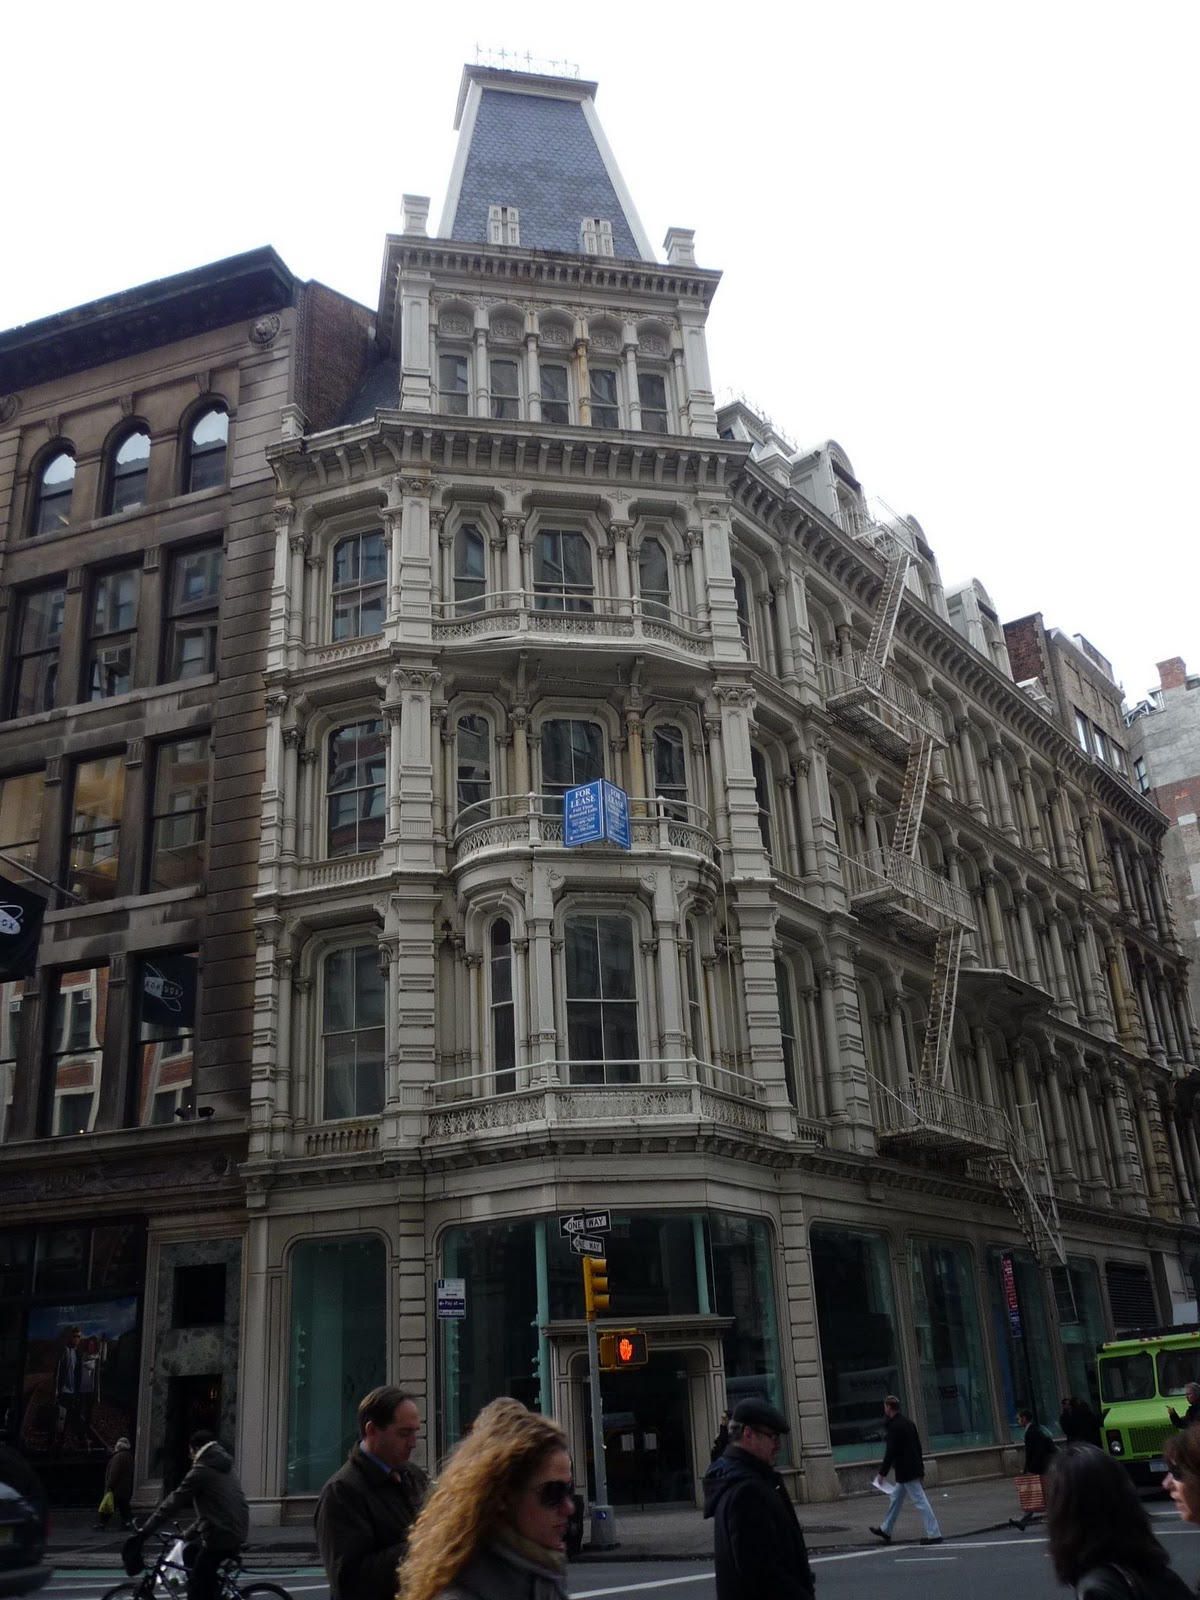 Saks Fifth Avenue - - Midtown East - New York Store & Shopping Guide